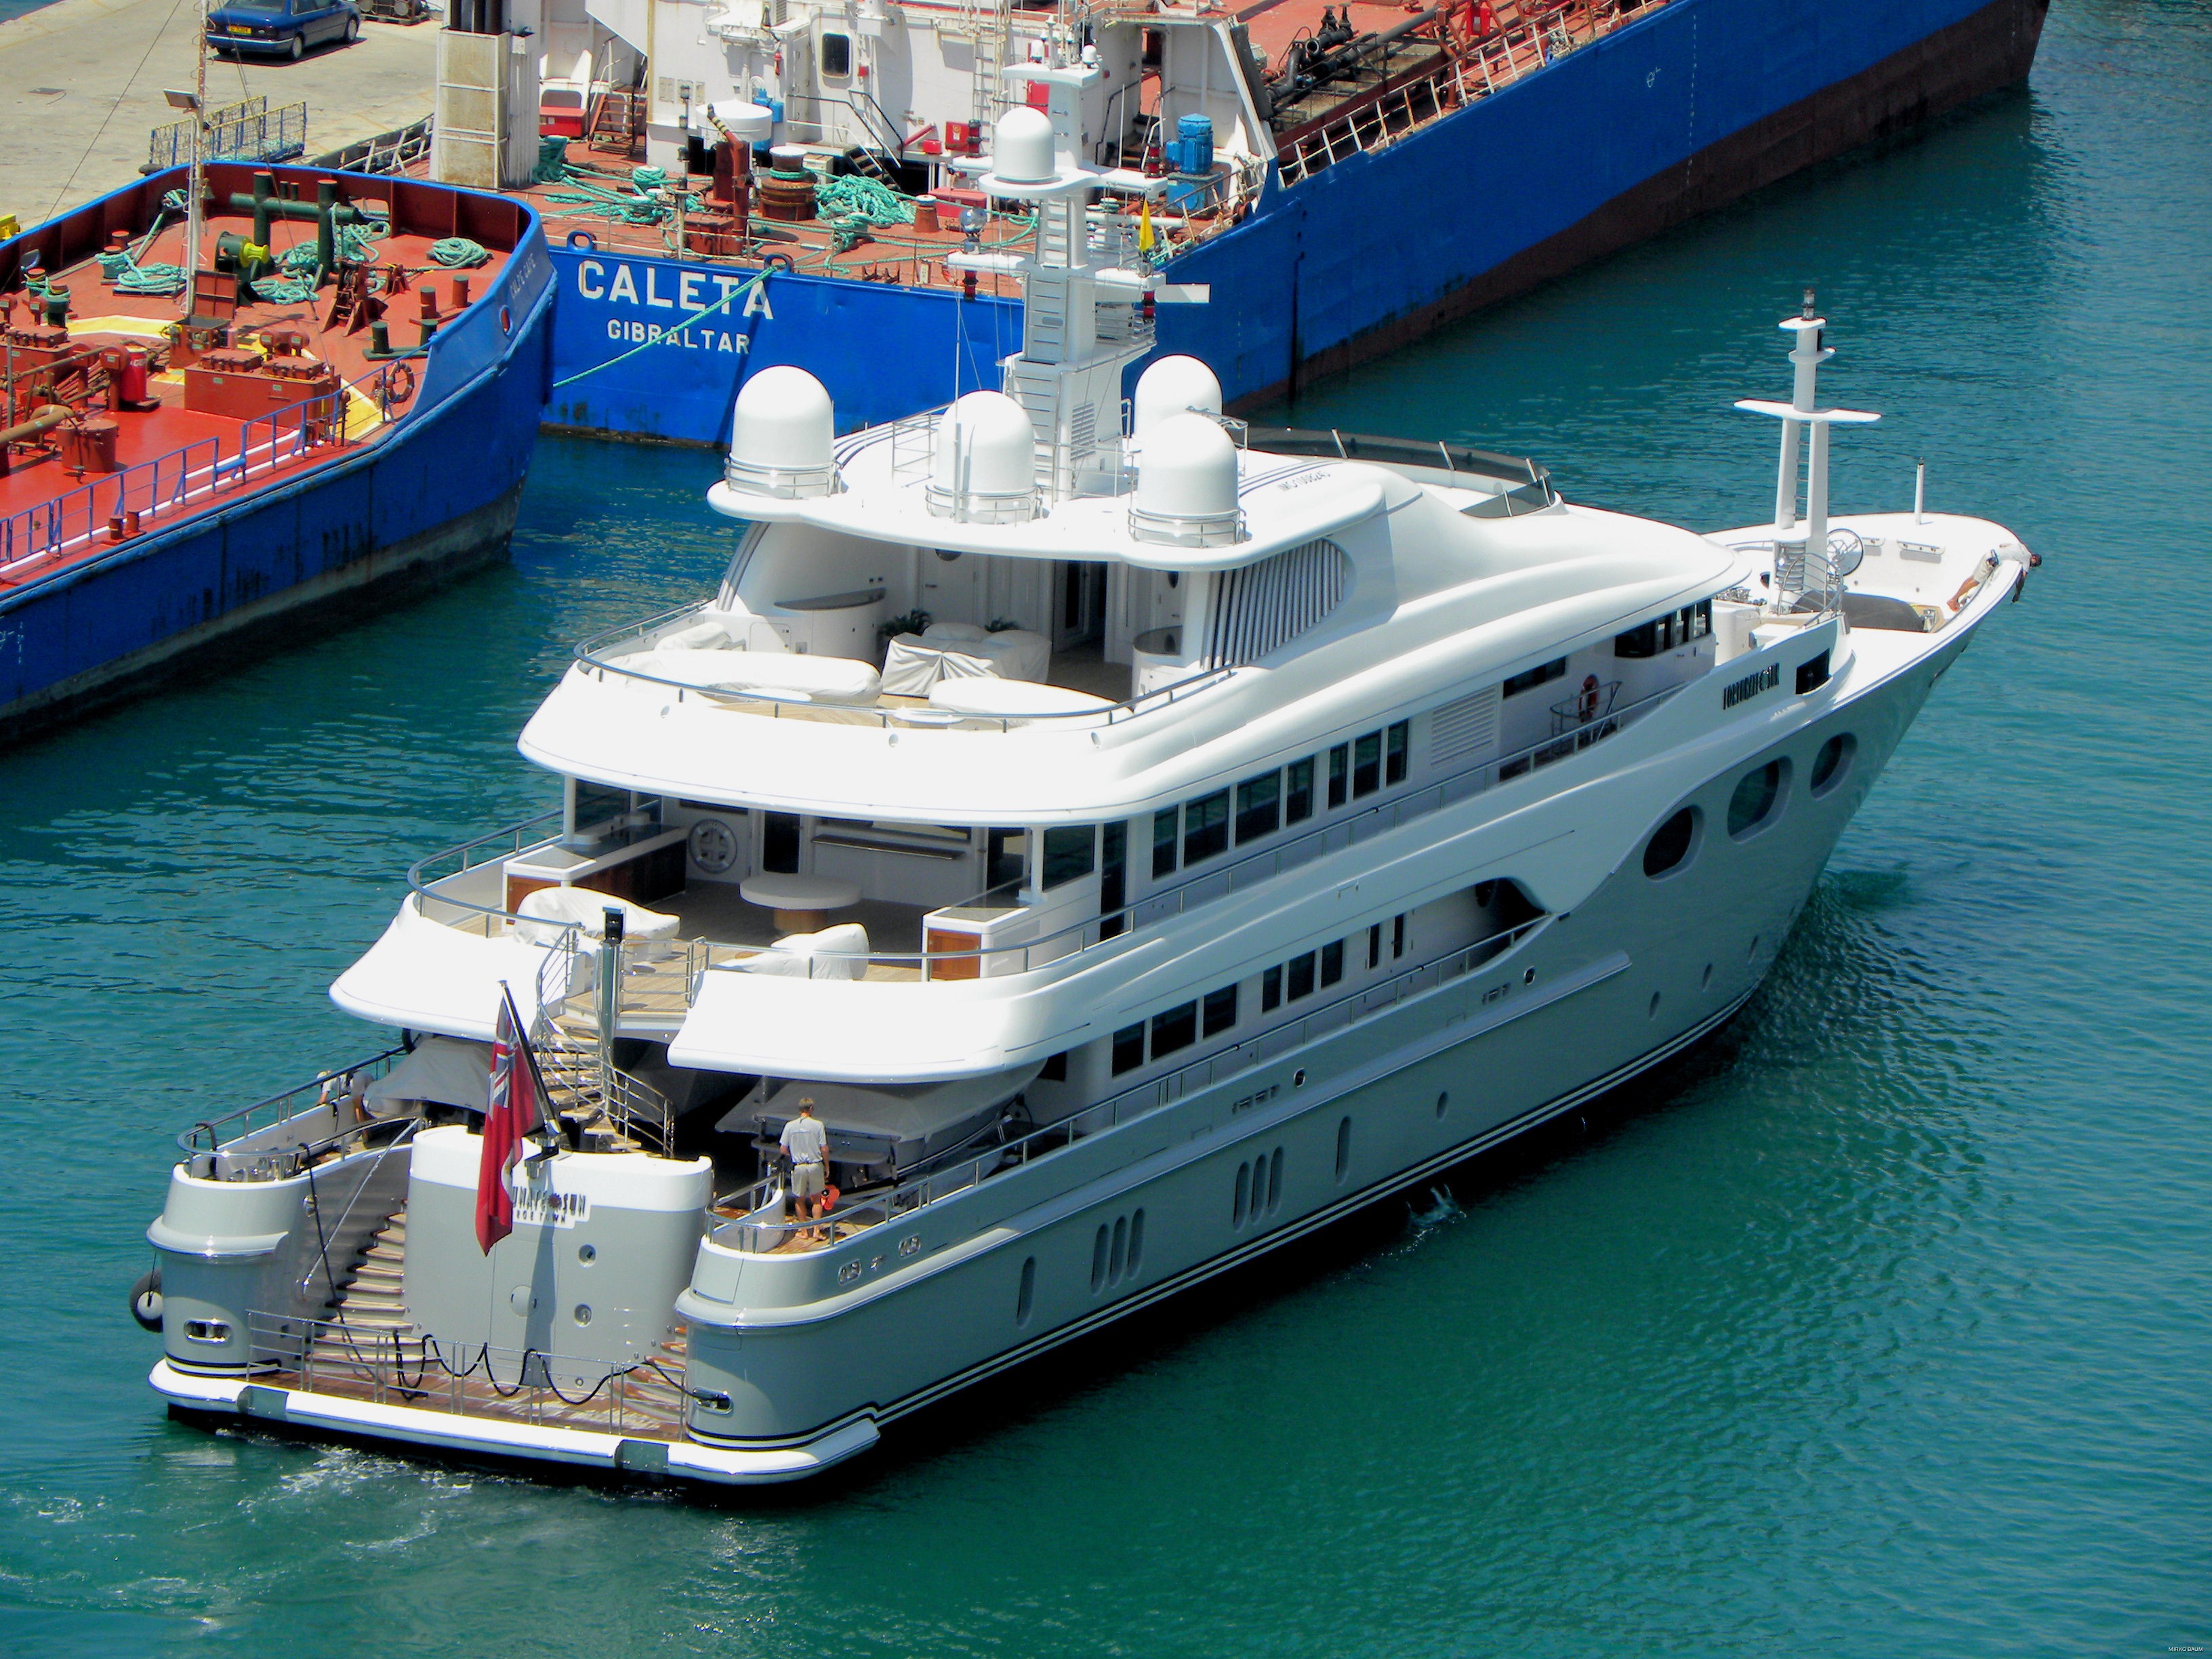 who owns fortunate sun yacht